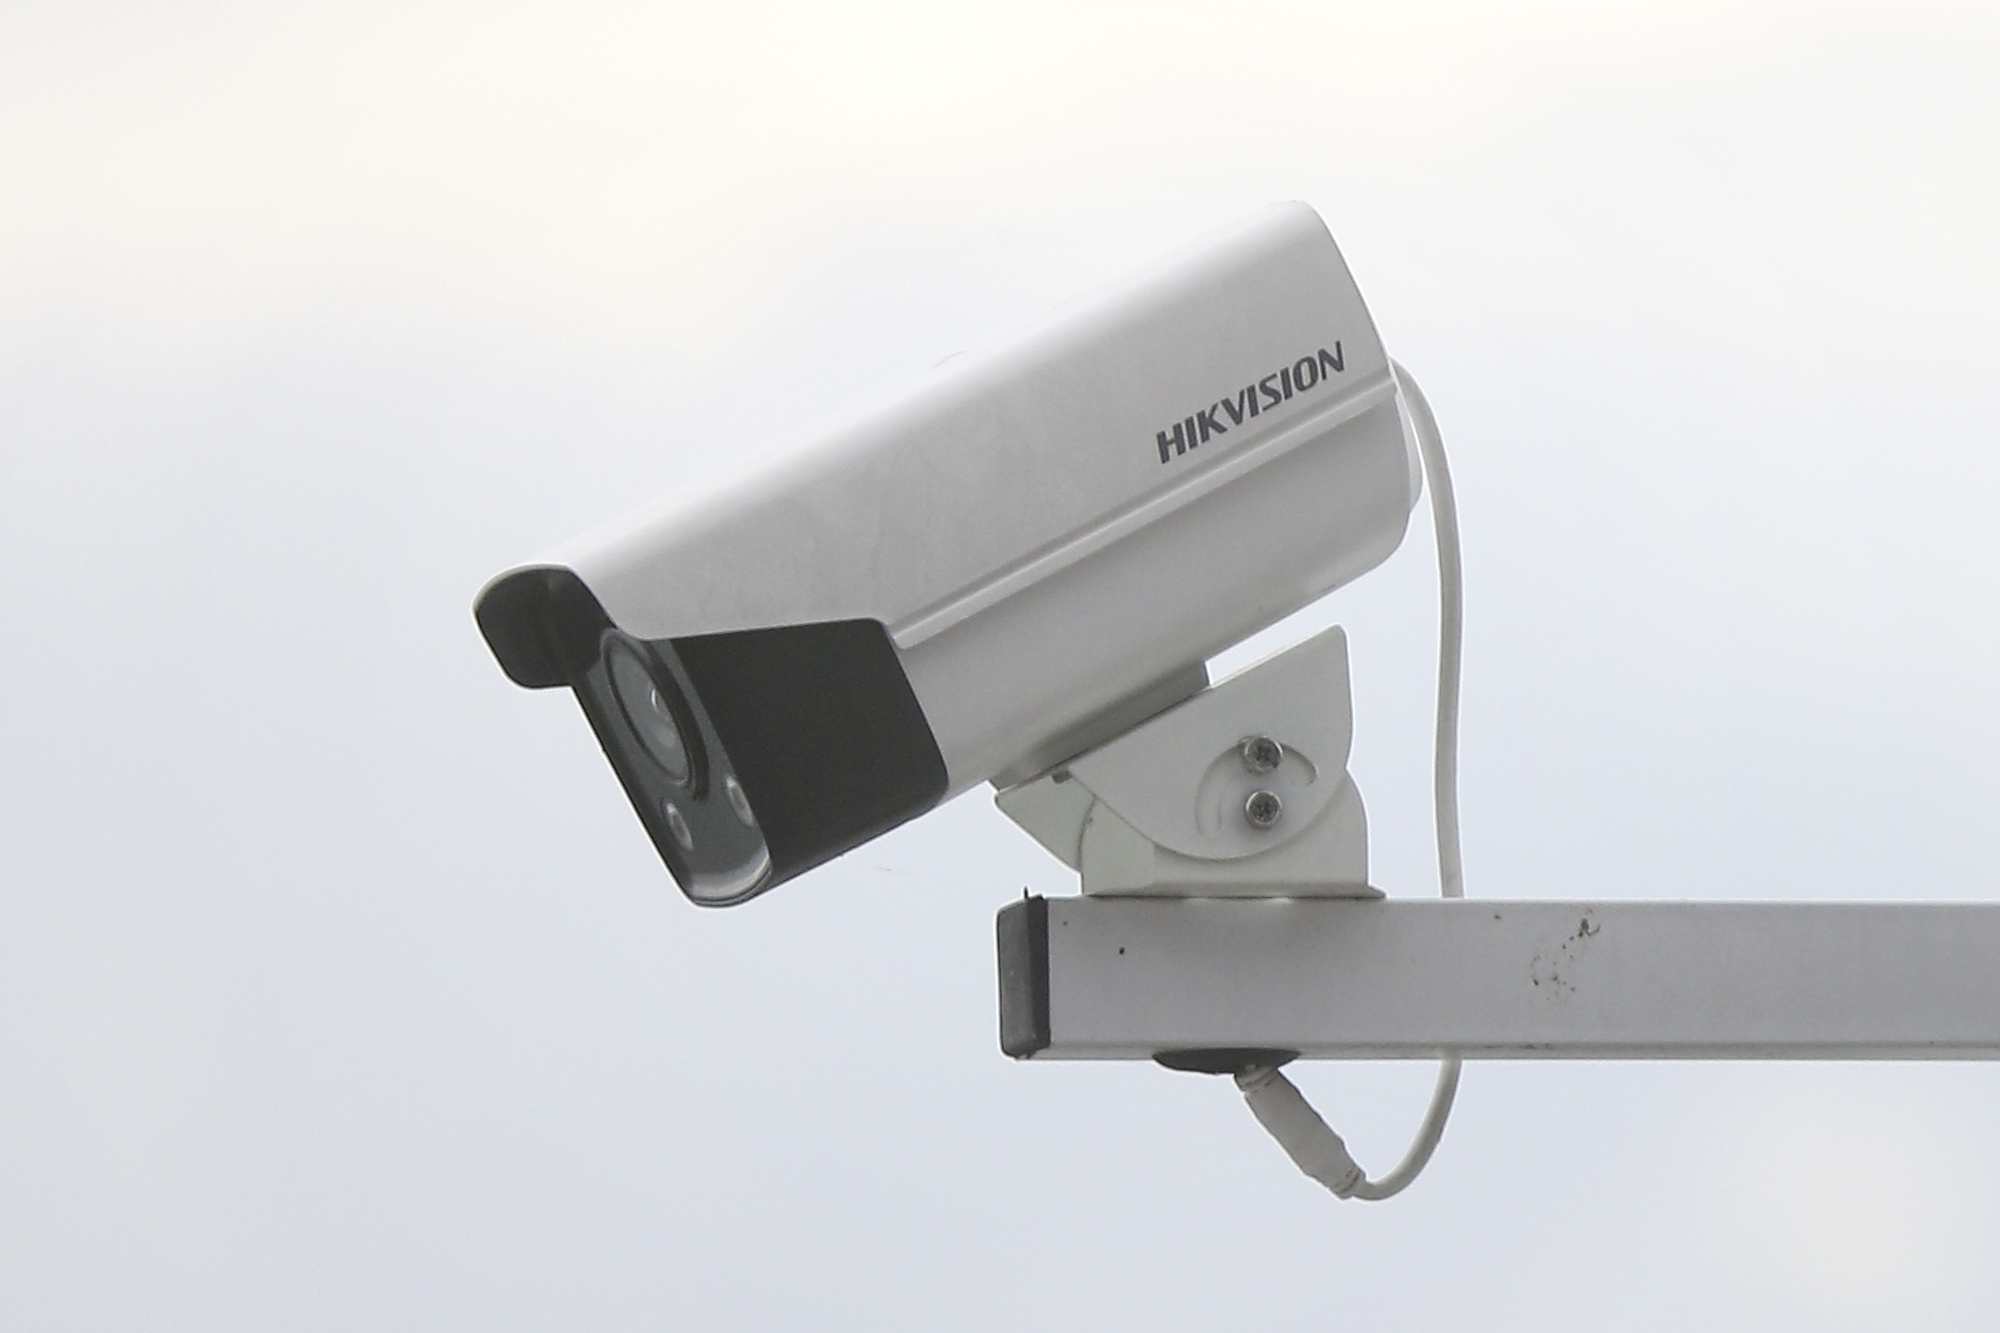 A Hikvision security camera is seen in Guangyuan, Sichuan Province, China, on July 31, 2020. (VCG via Getty Images)